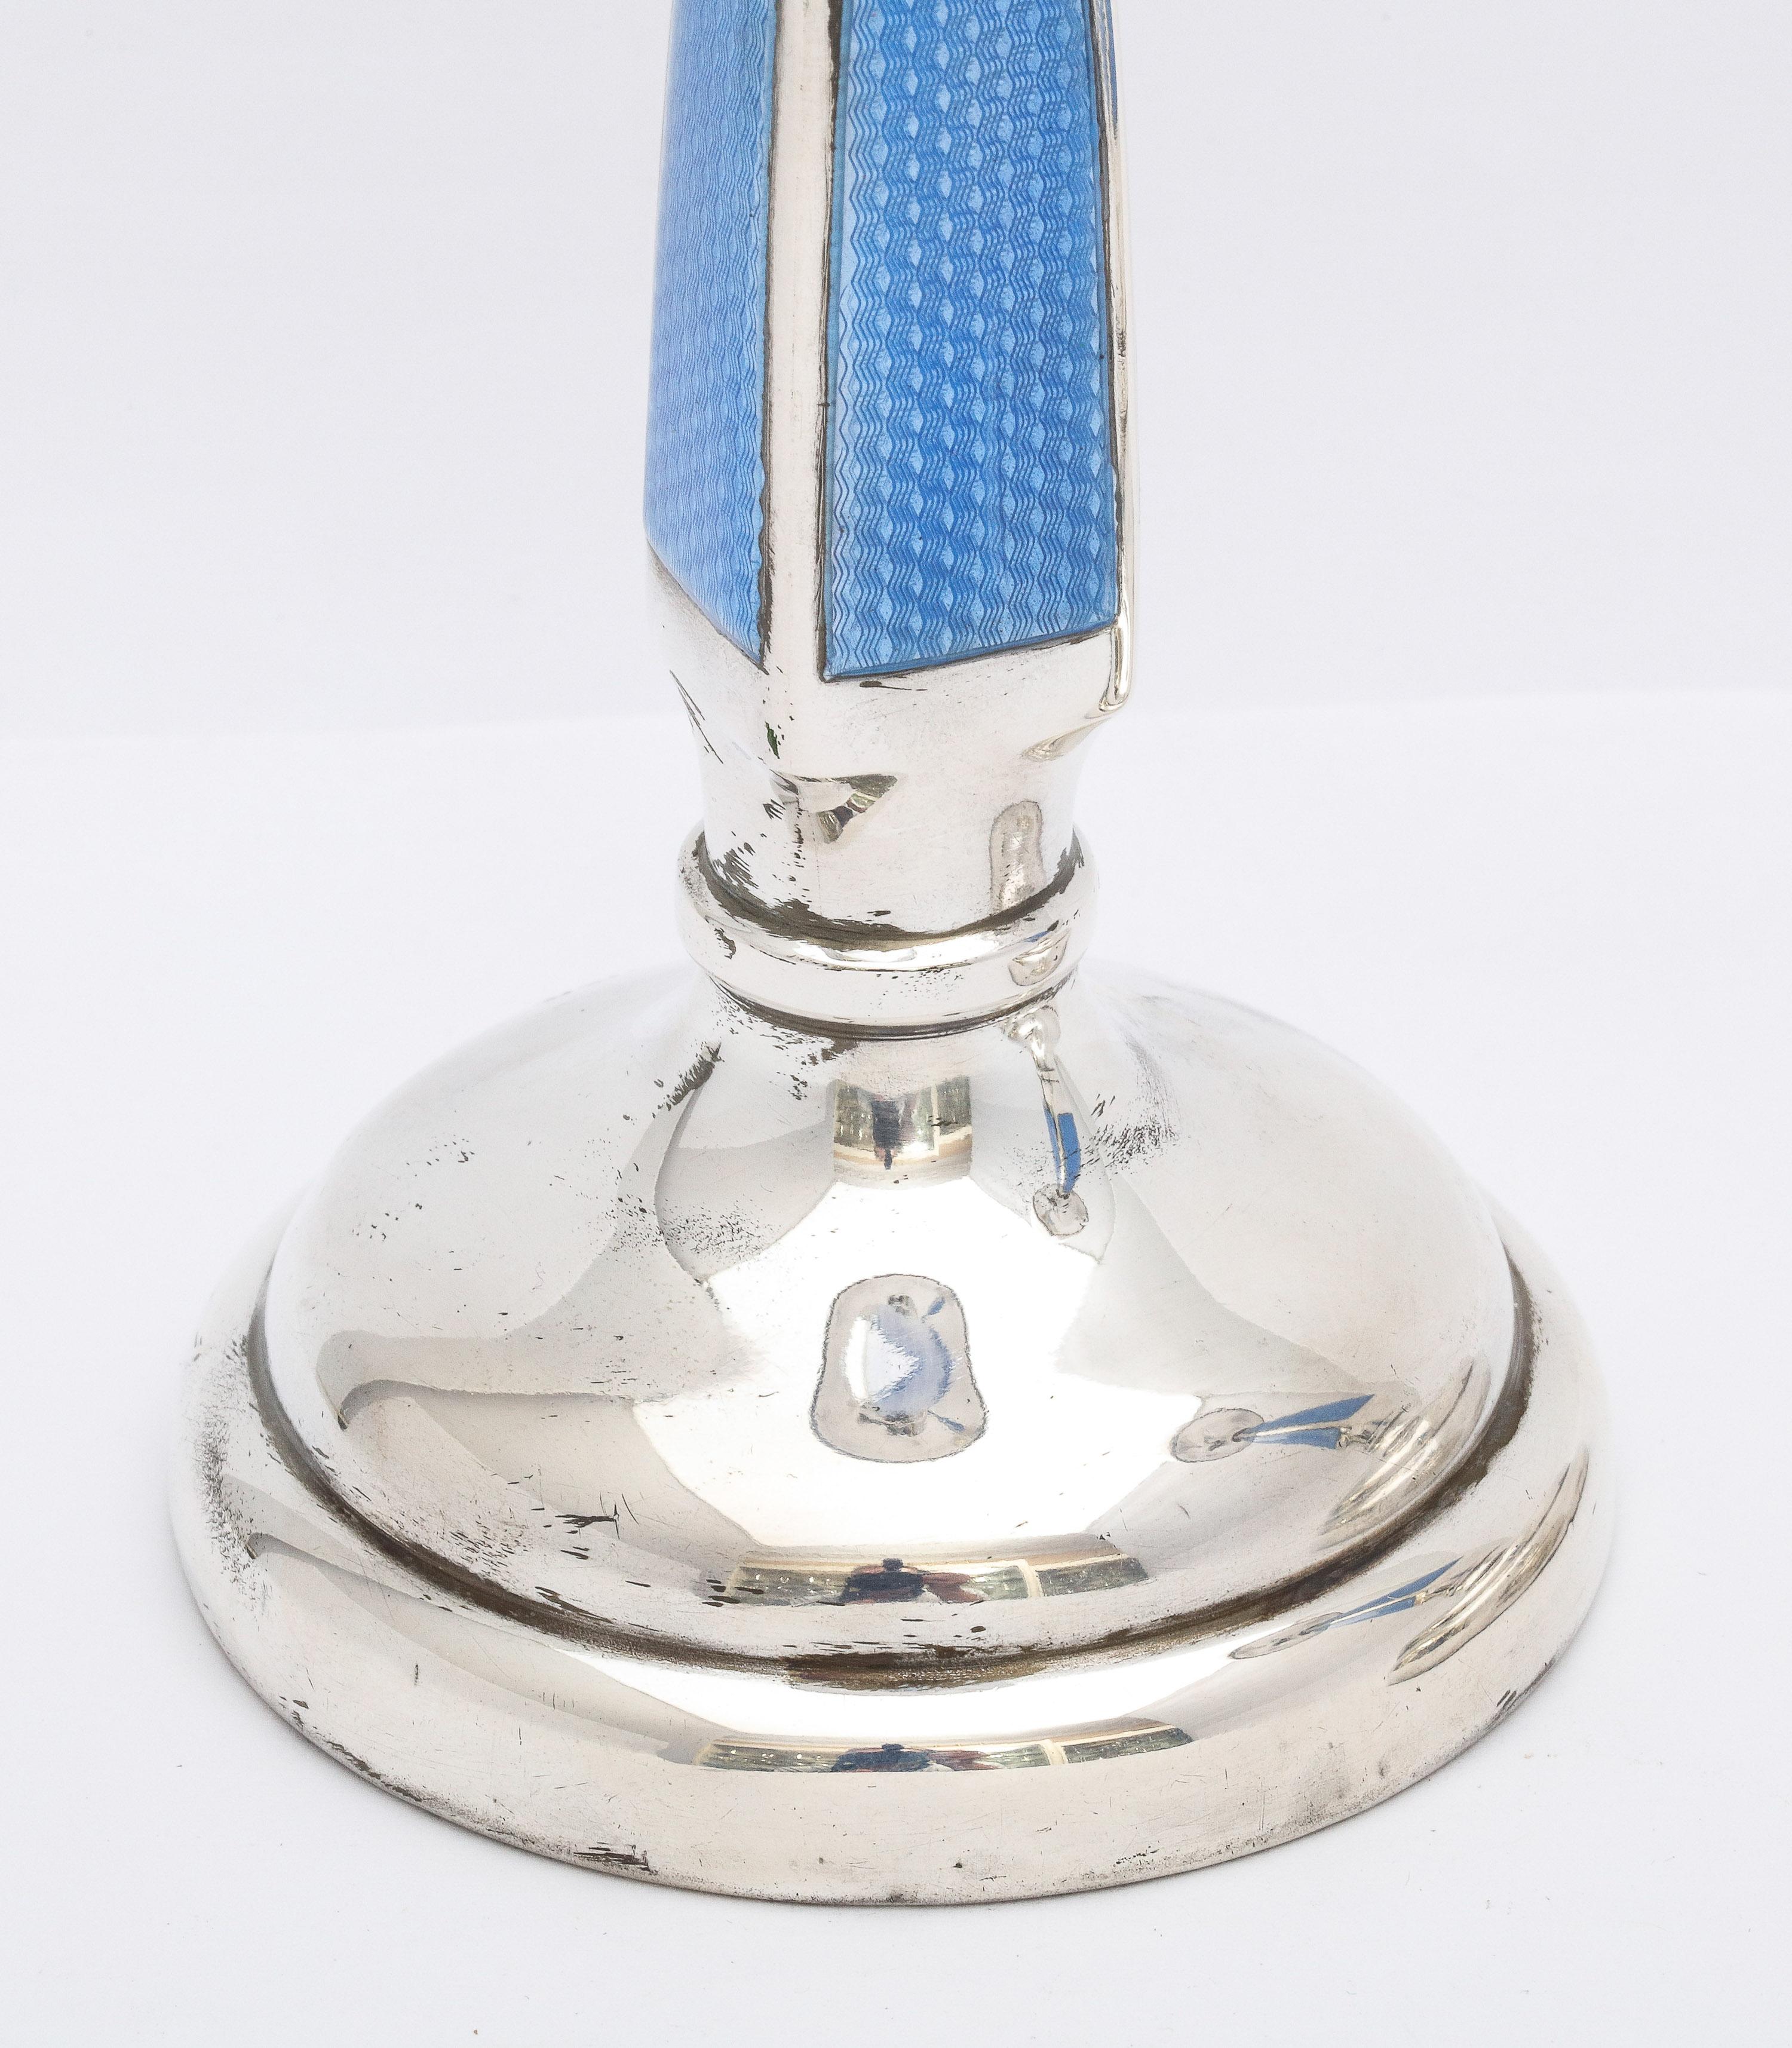 Early 20th Century Rare Pair of Art Deco Sterling Silver and Blue Guilloche Enamel Candlesticks For Sale